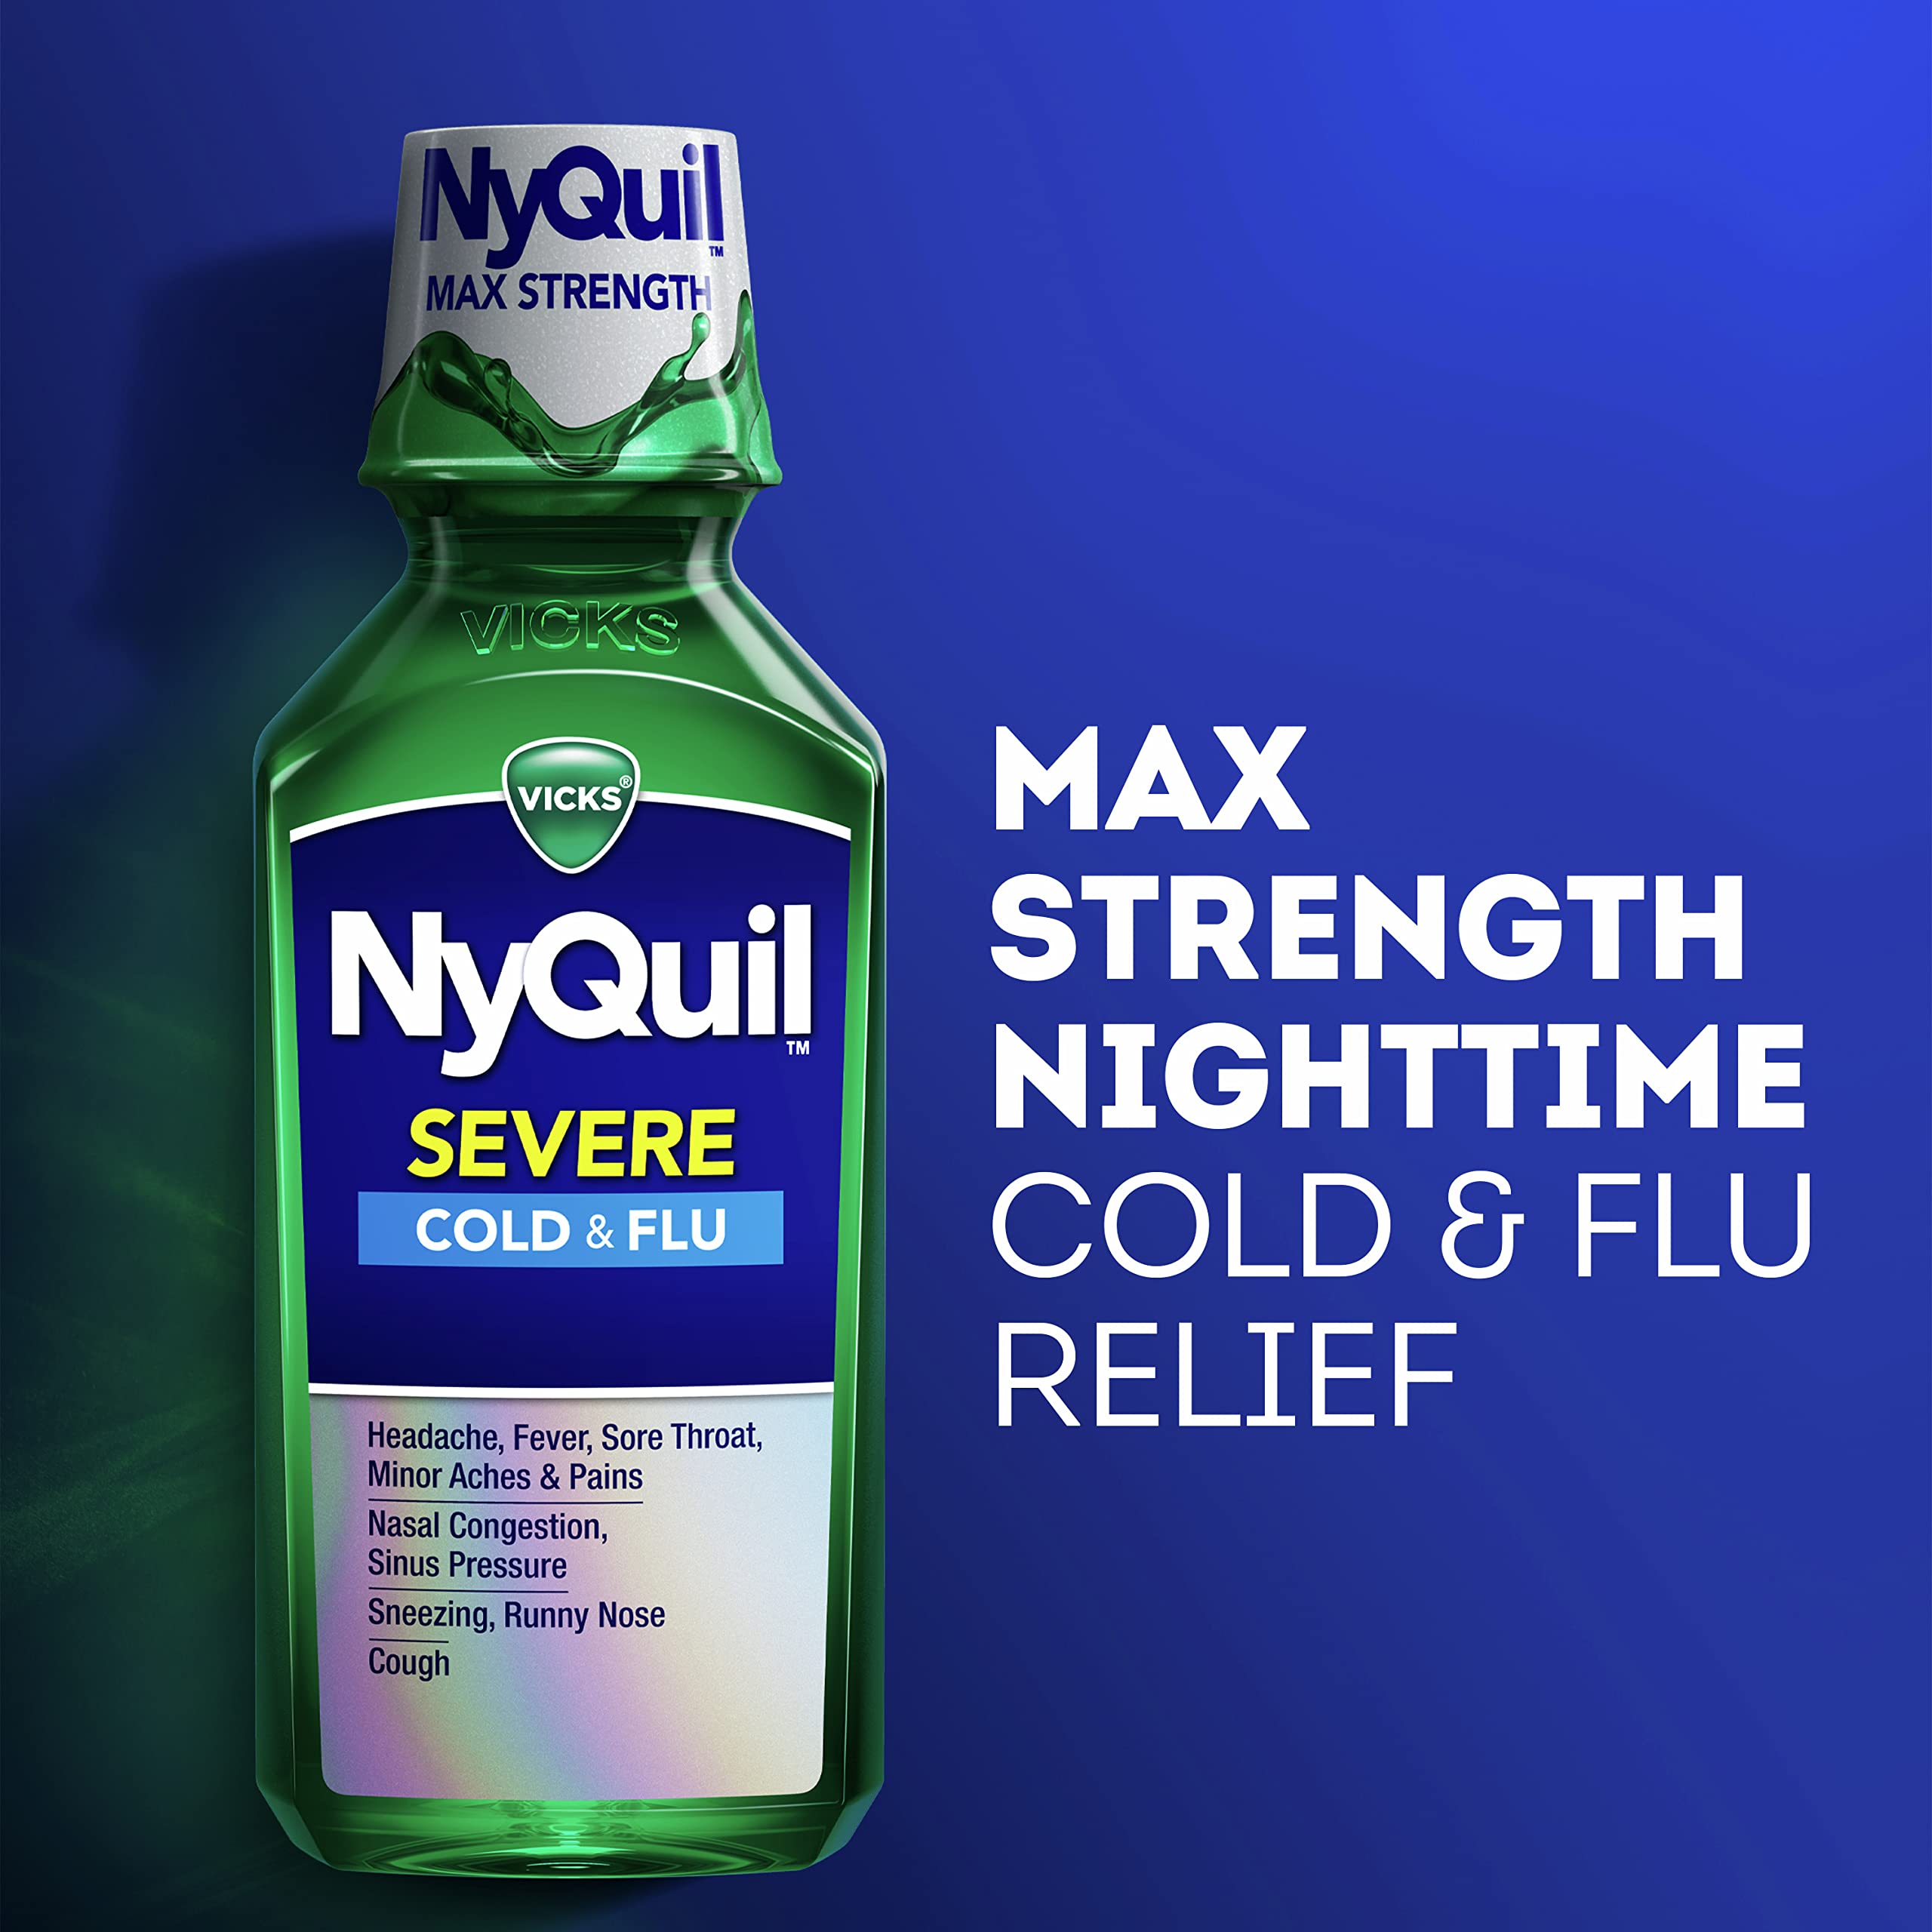 Vicks NyQuil SEVERE Cold and Flu Relief Liquid Medicine, Maximum Strength, 9-Symptom Nighttime Relief For Headache, Fever, Sore Throat, Nasal Congestion, Sinus Pressure, Runny Nose, Cough, (Pack of 2)